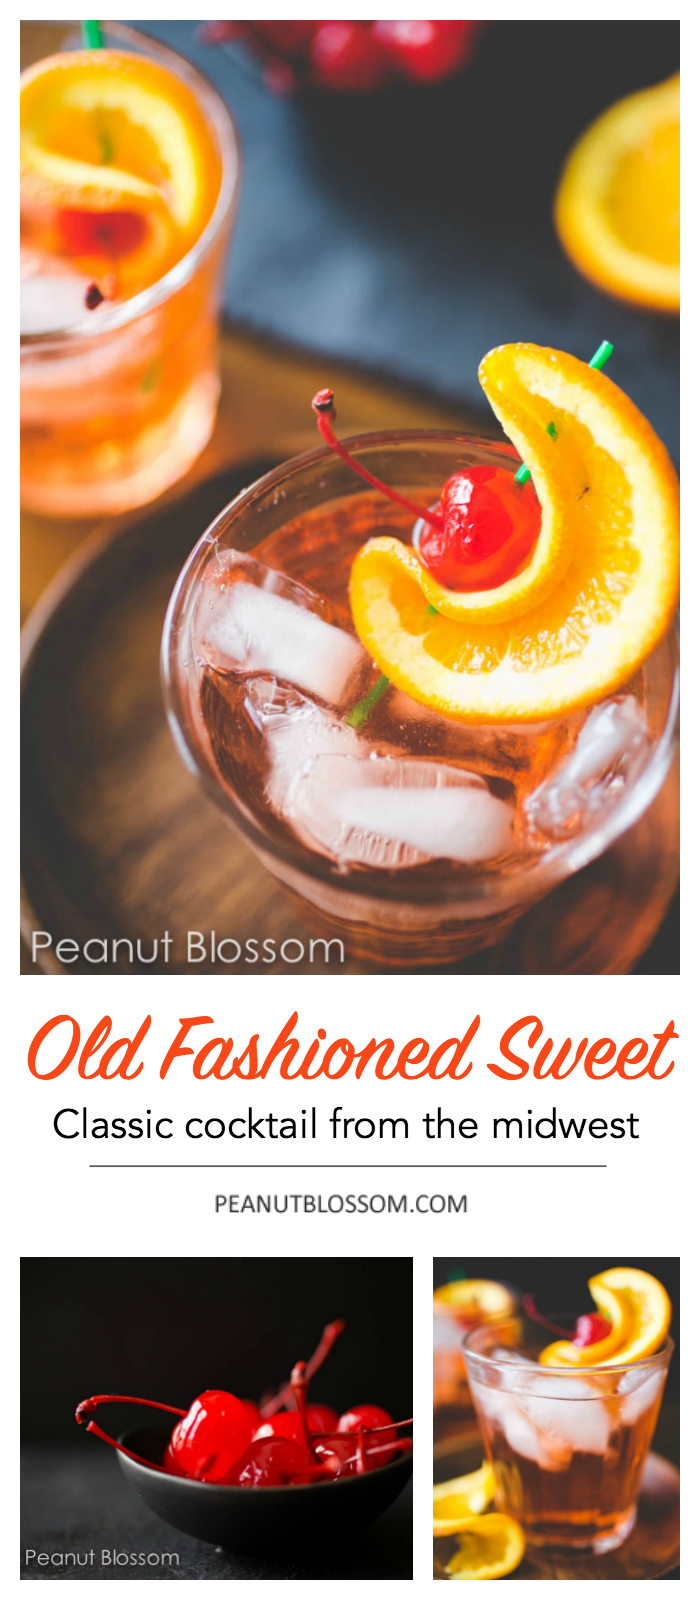 The photo collage shows the brandy old fashioned sweet with a cherry and orange garnish.